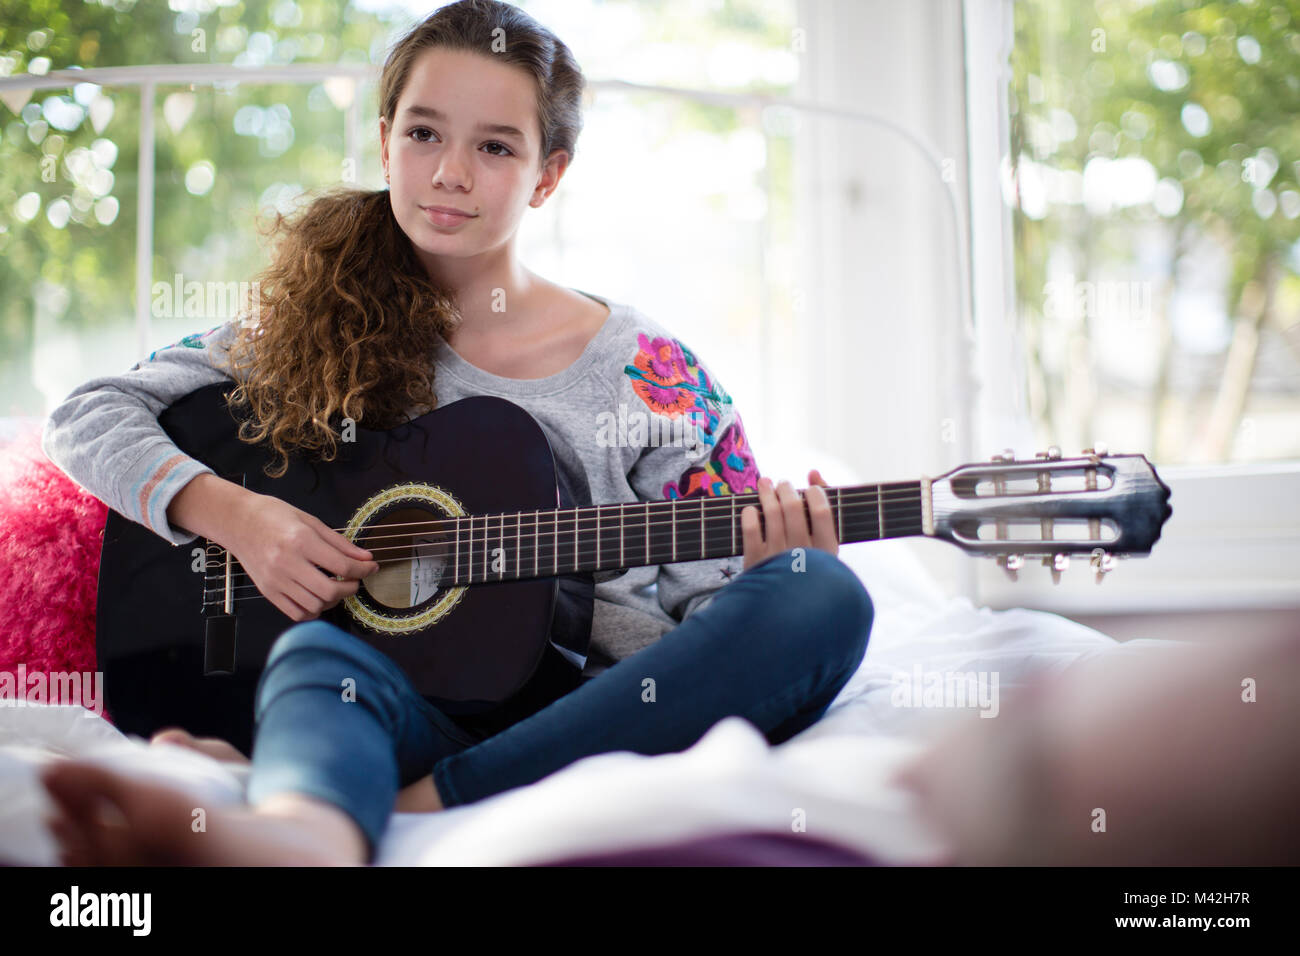 Teenager playing acoustic guitar Banque D'Images